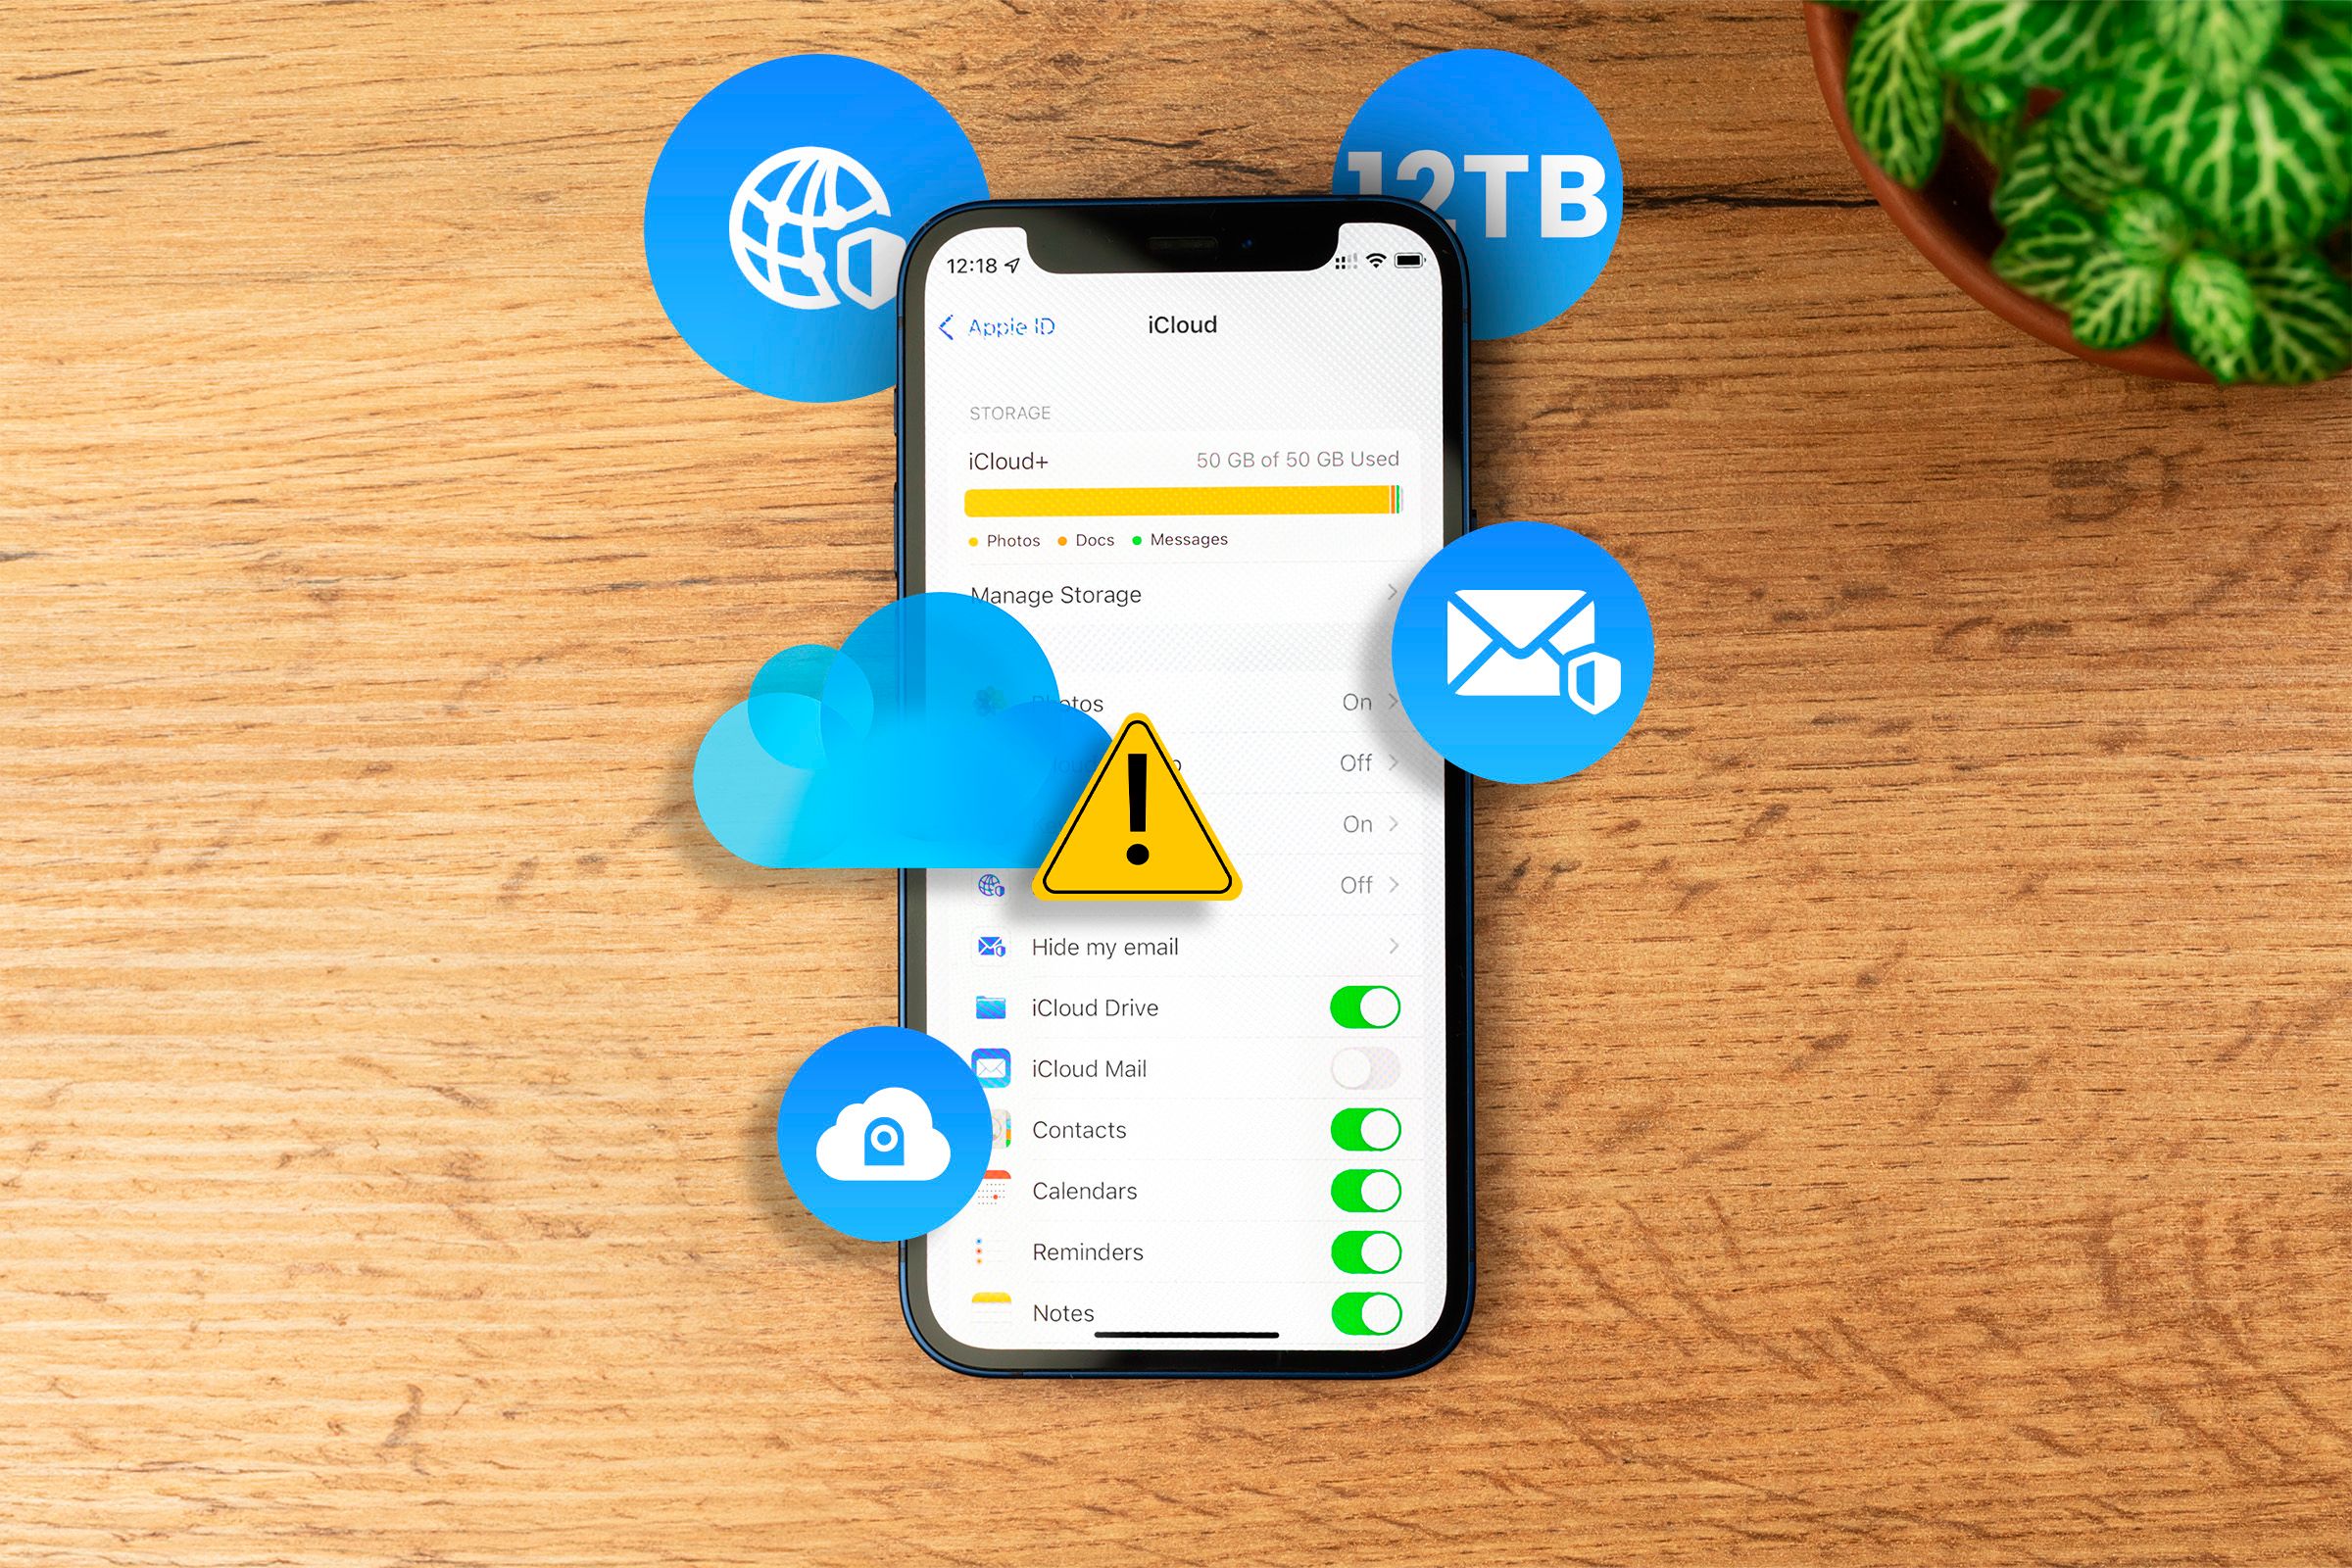 An iPhone displaying the storage screen, the iCloud logo with a warning sign, and several icons around, representing some of Icloud's features.